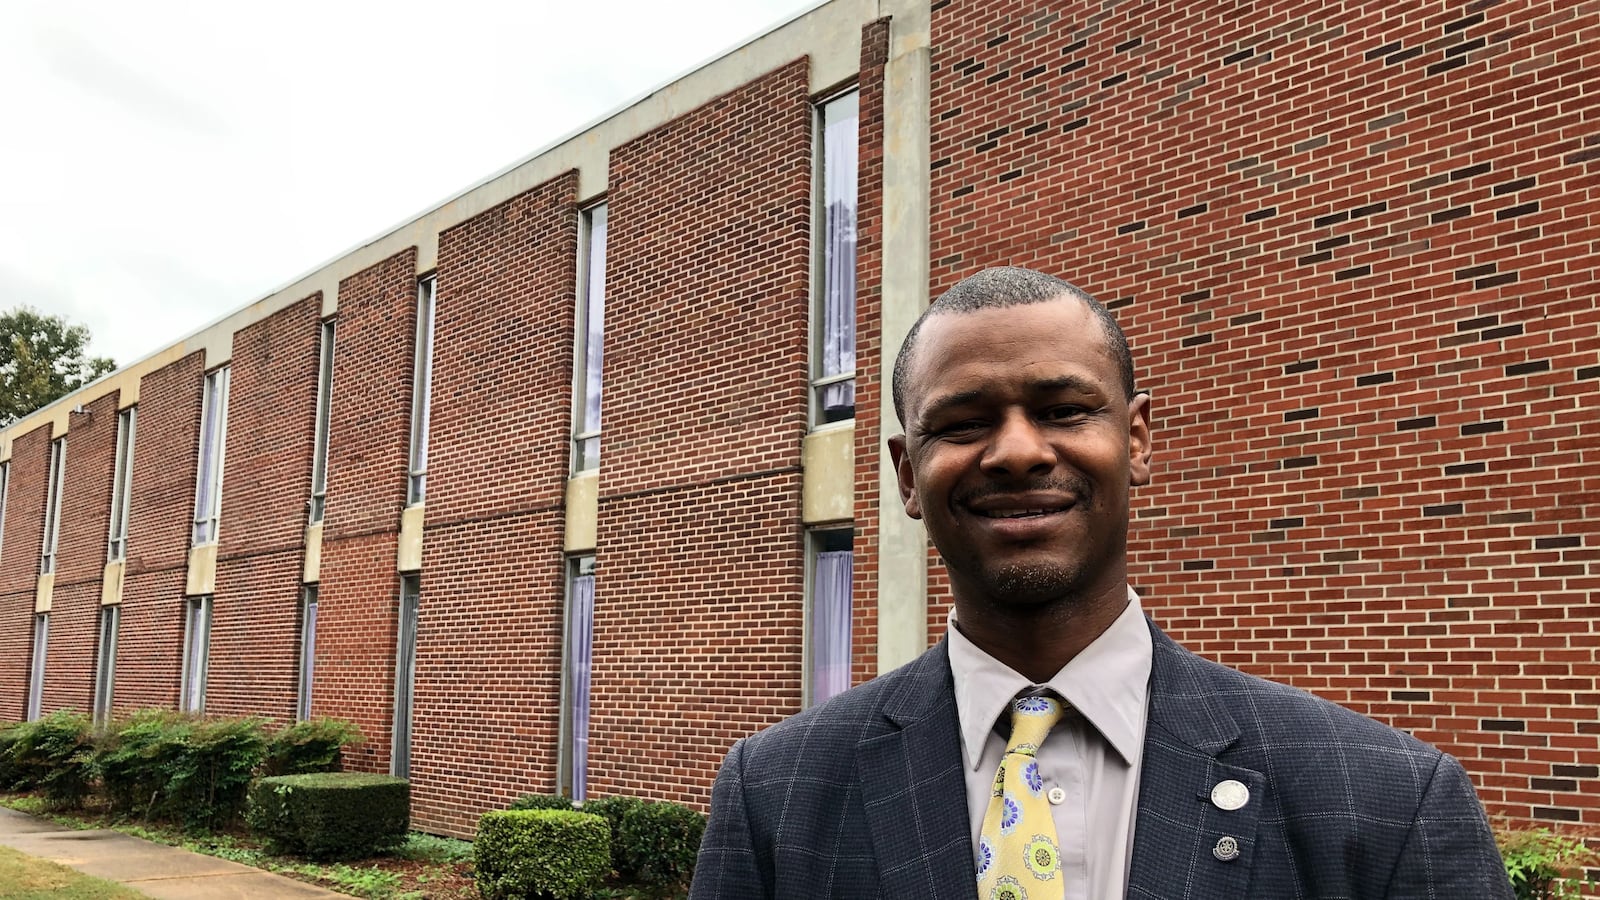 Charlie Caswell also created Legacy of Legends, a community development corporation that’s partnering with the University of Tennessee and health professionals to work with Memphis students.